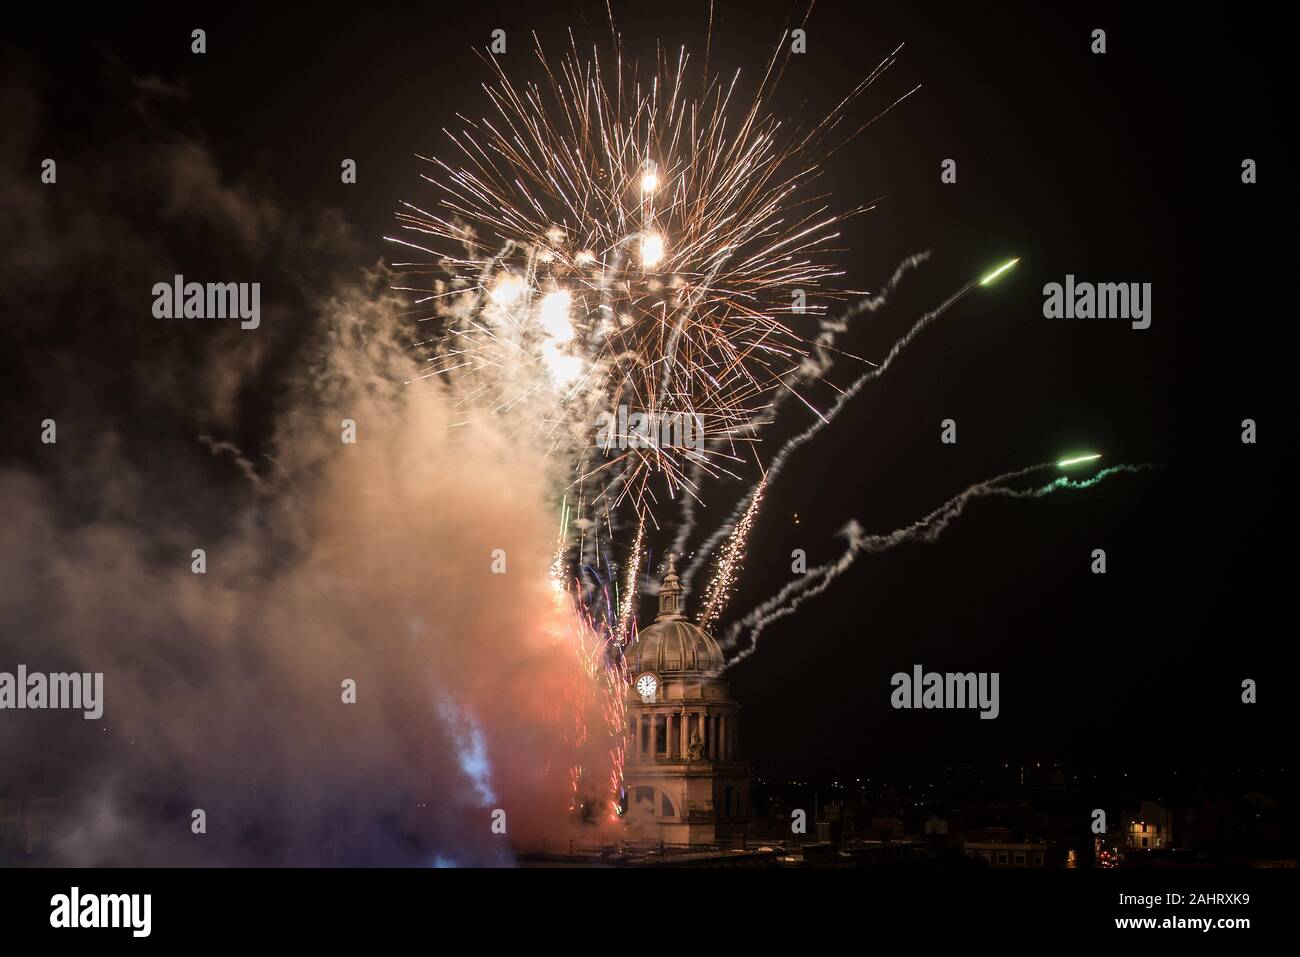 Fireworks light up the sky over the Old Market Square in Nottingham during the New Year celebrations. Stock Photo